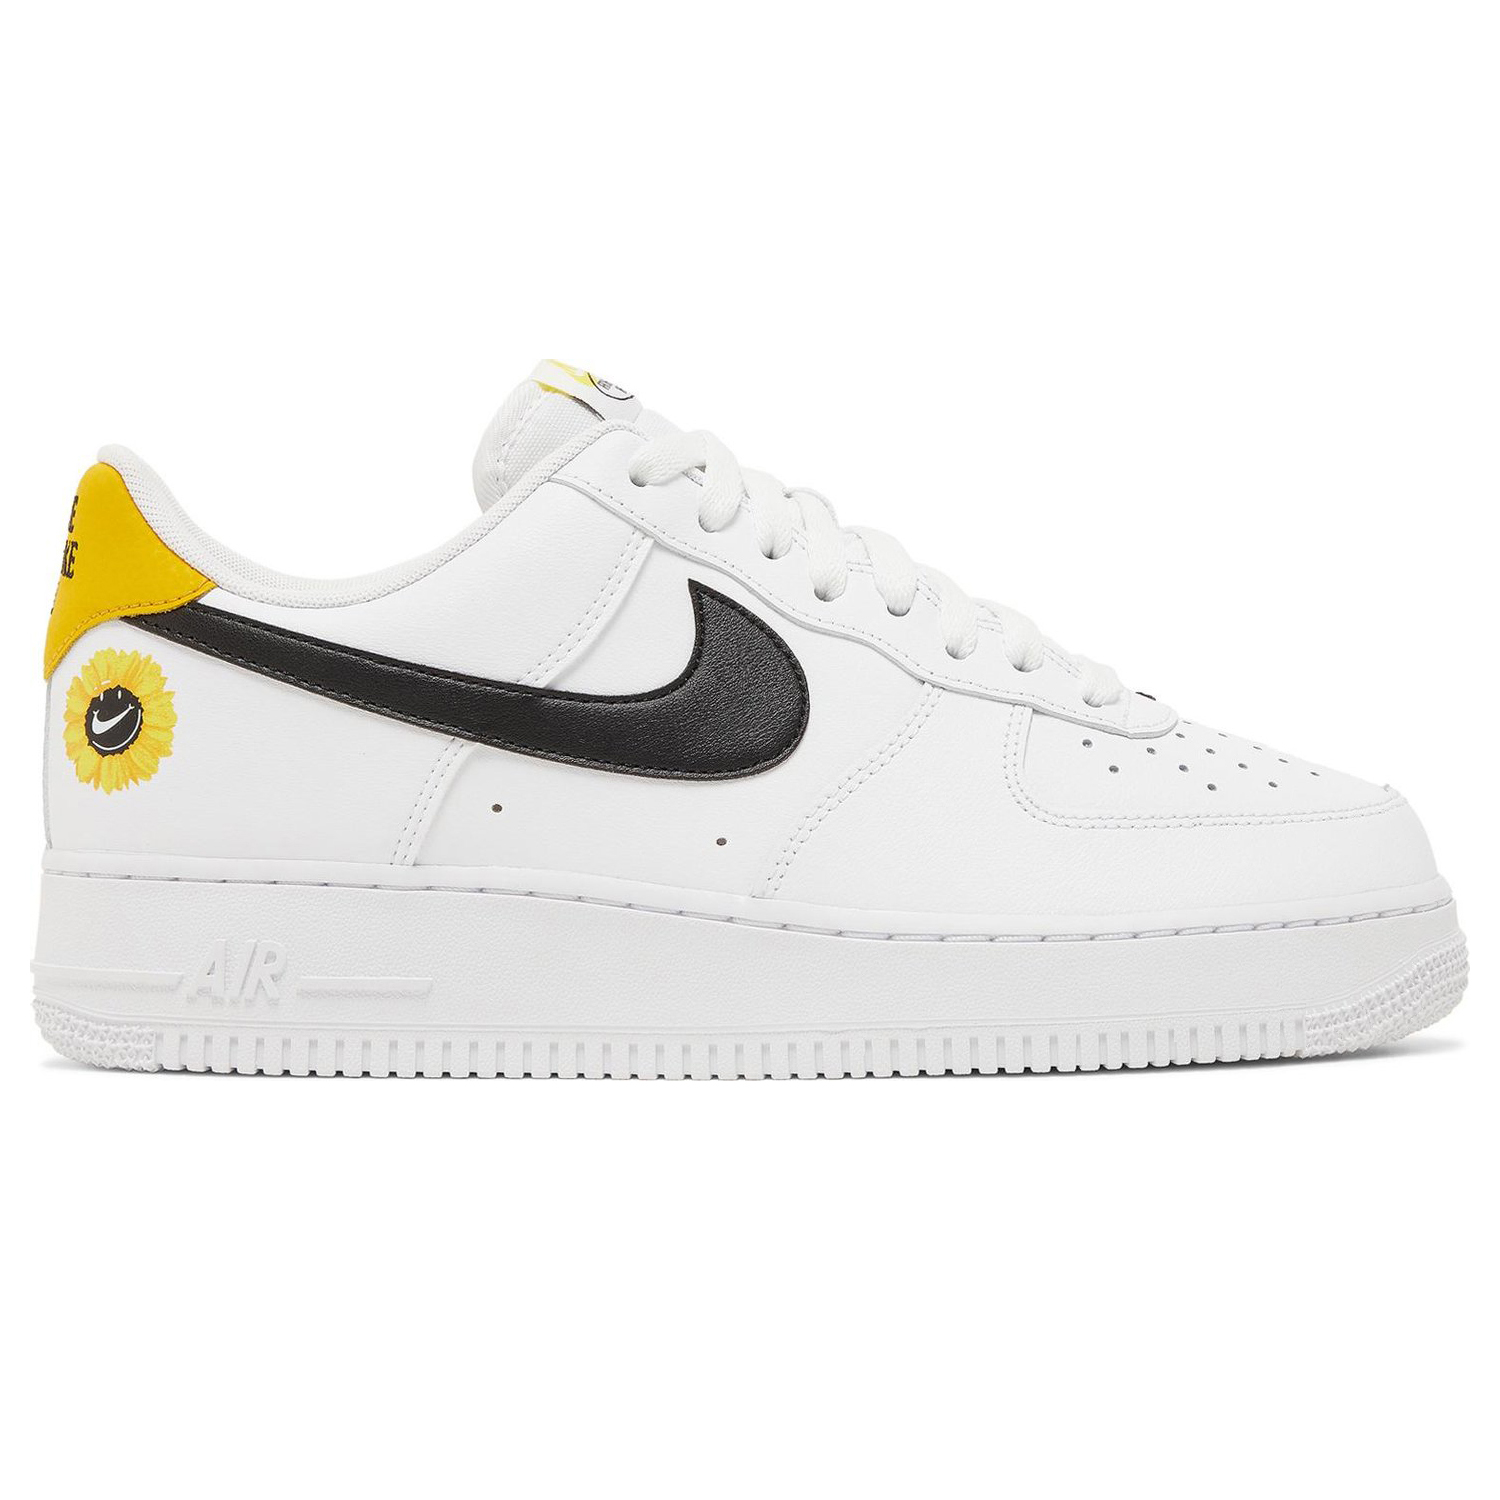 Кроссовки Nike Air Force 1 '07 LV8 2 'Have A Nike Day', белый air force serenity ty9171wh